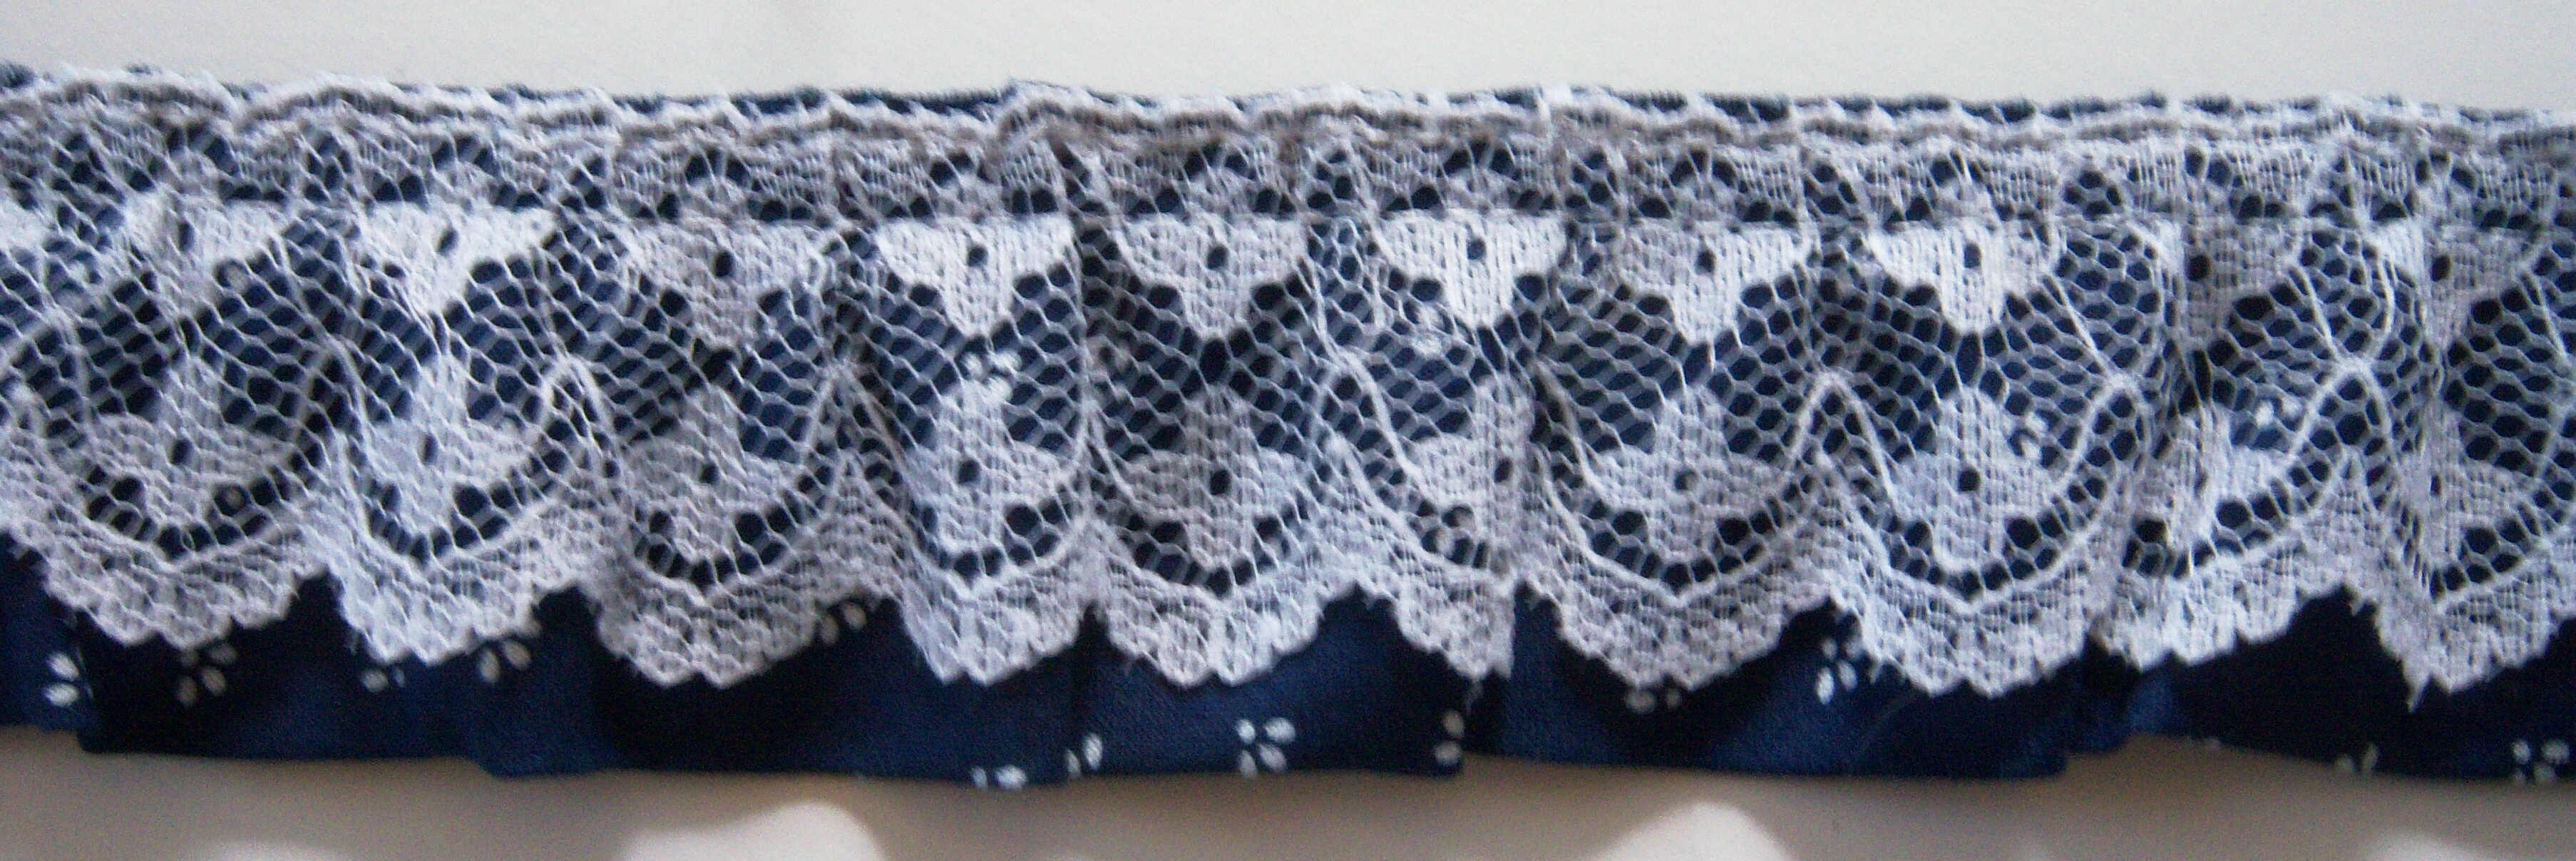 White Lace/Navy Print Ruffled Poly Cotton